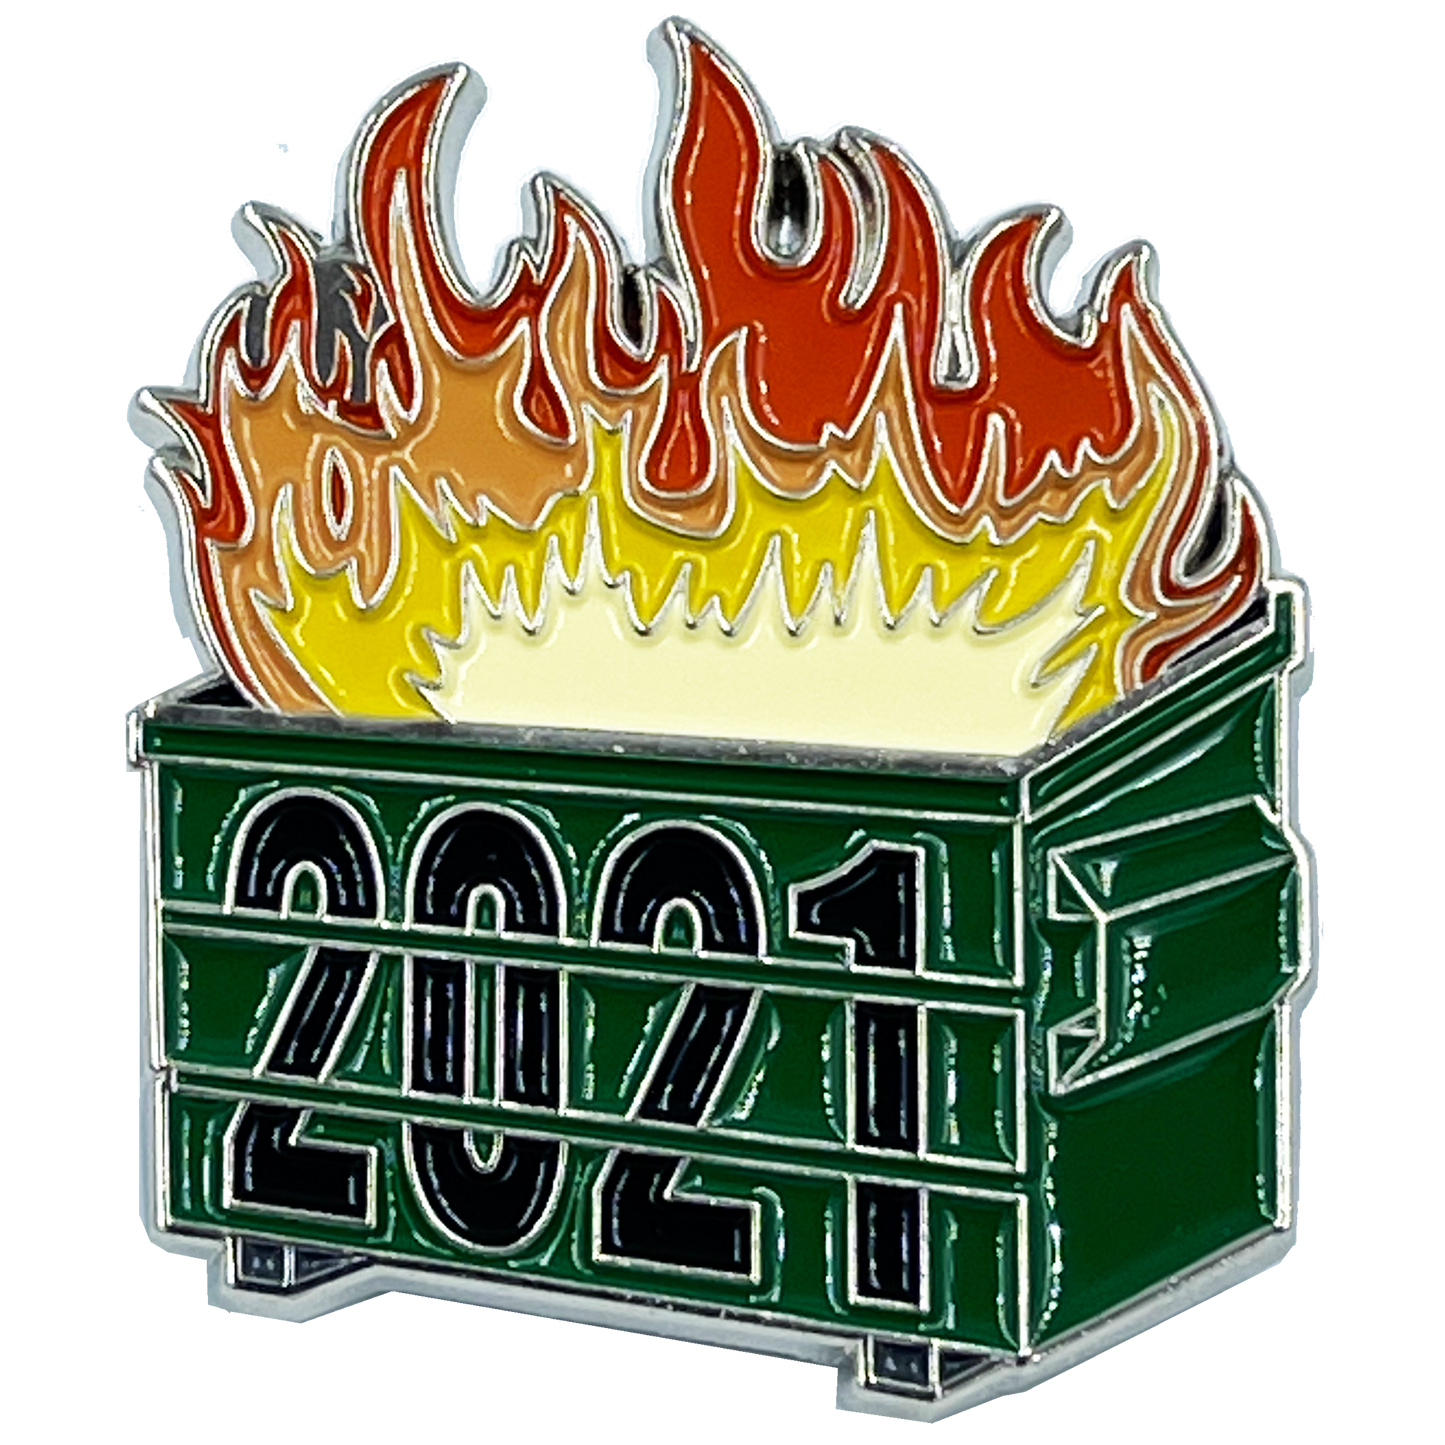 BL11-017 Official 2021 Dumpster Fire Collectible Pin with dual pin posts Pandemic, Killer Wasps, Riots, Police, Rioters